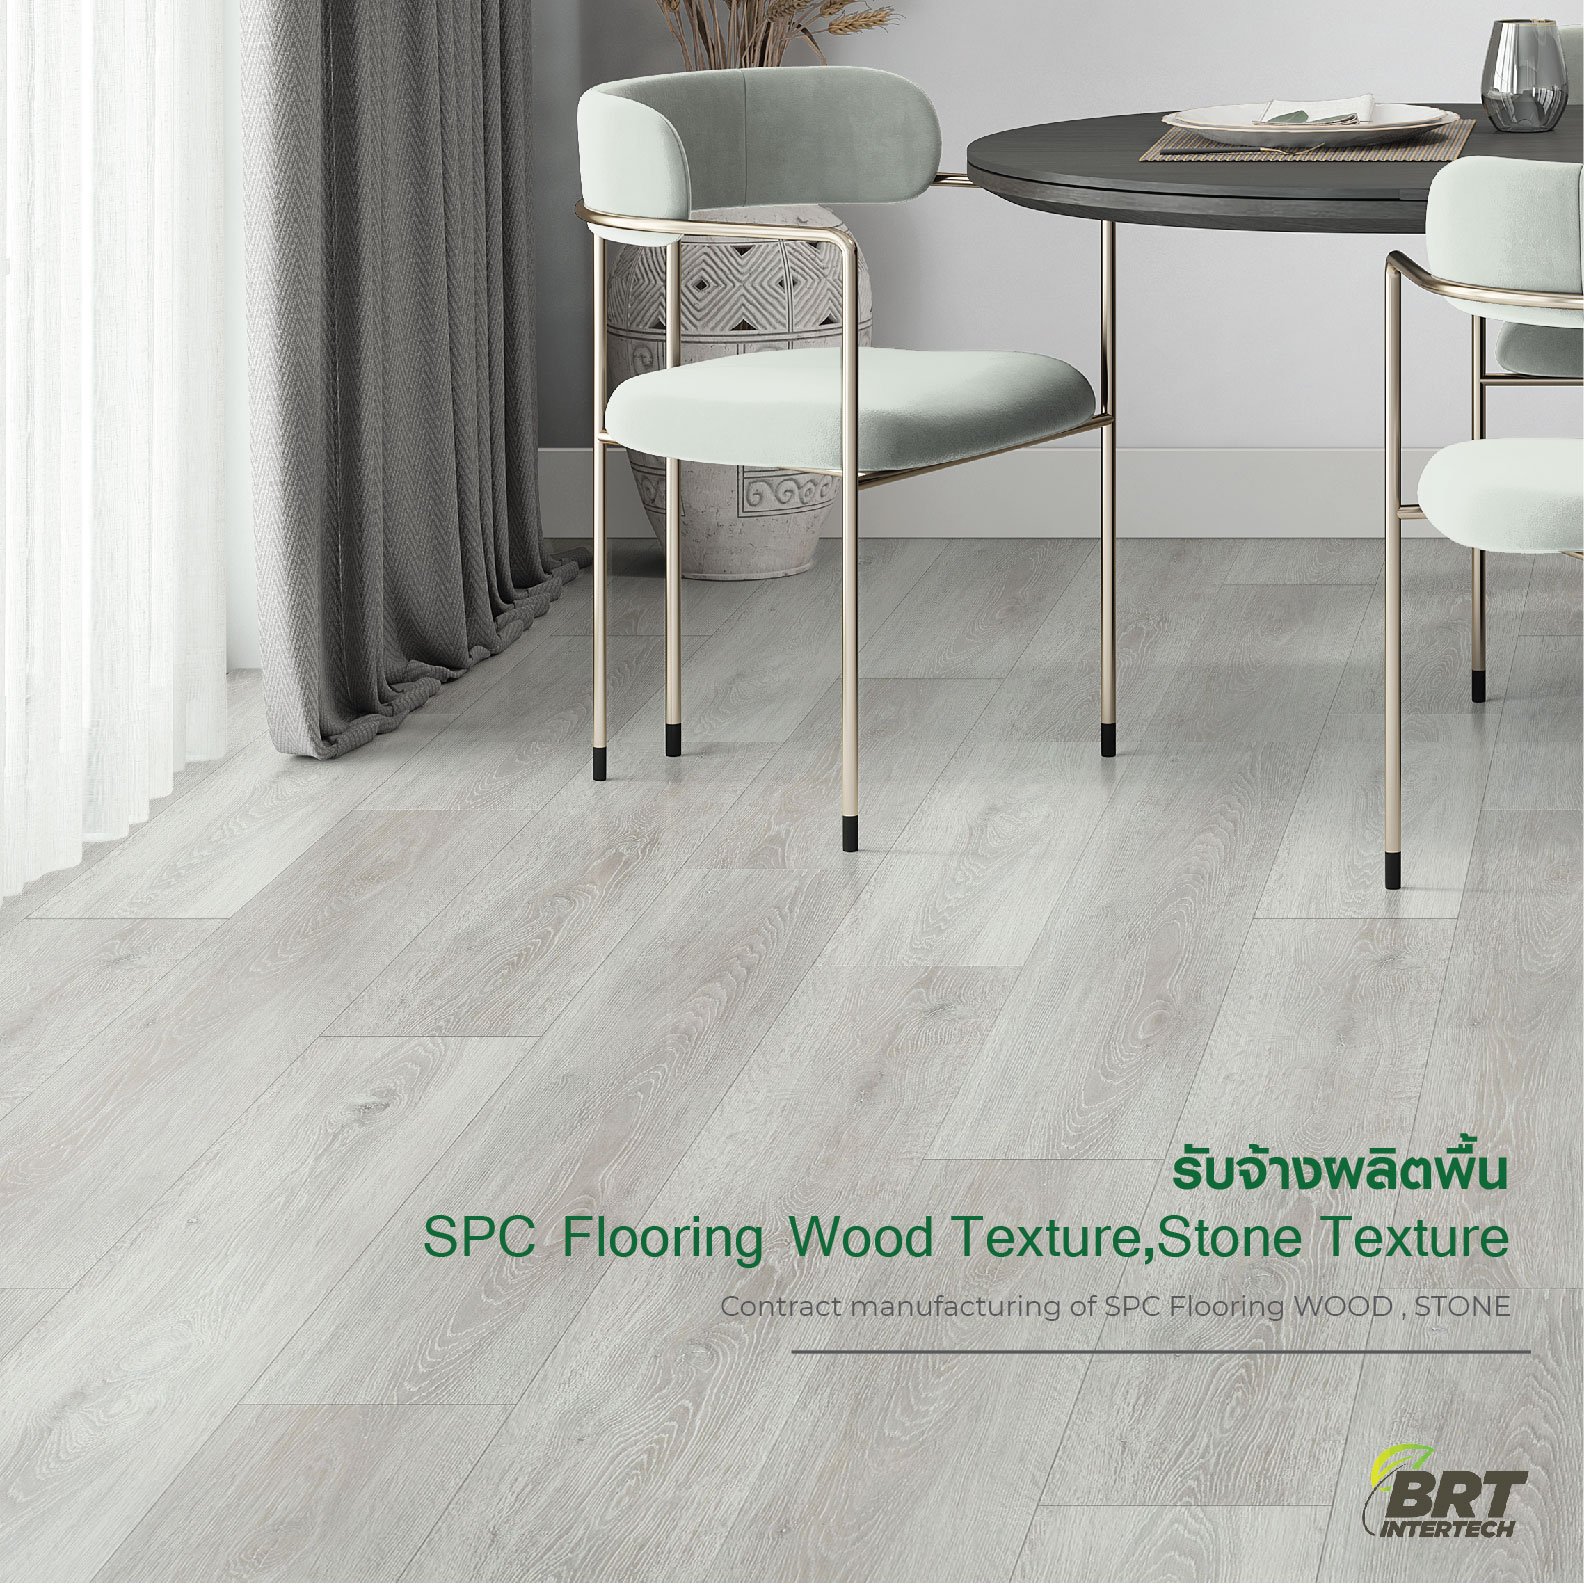 Contract manufacturing of SPC Flooring